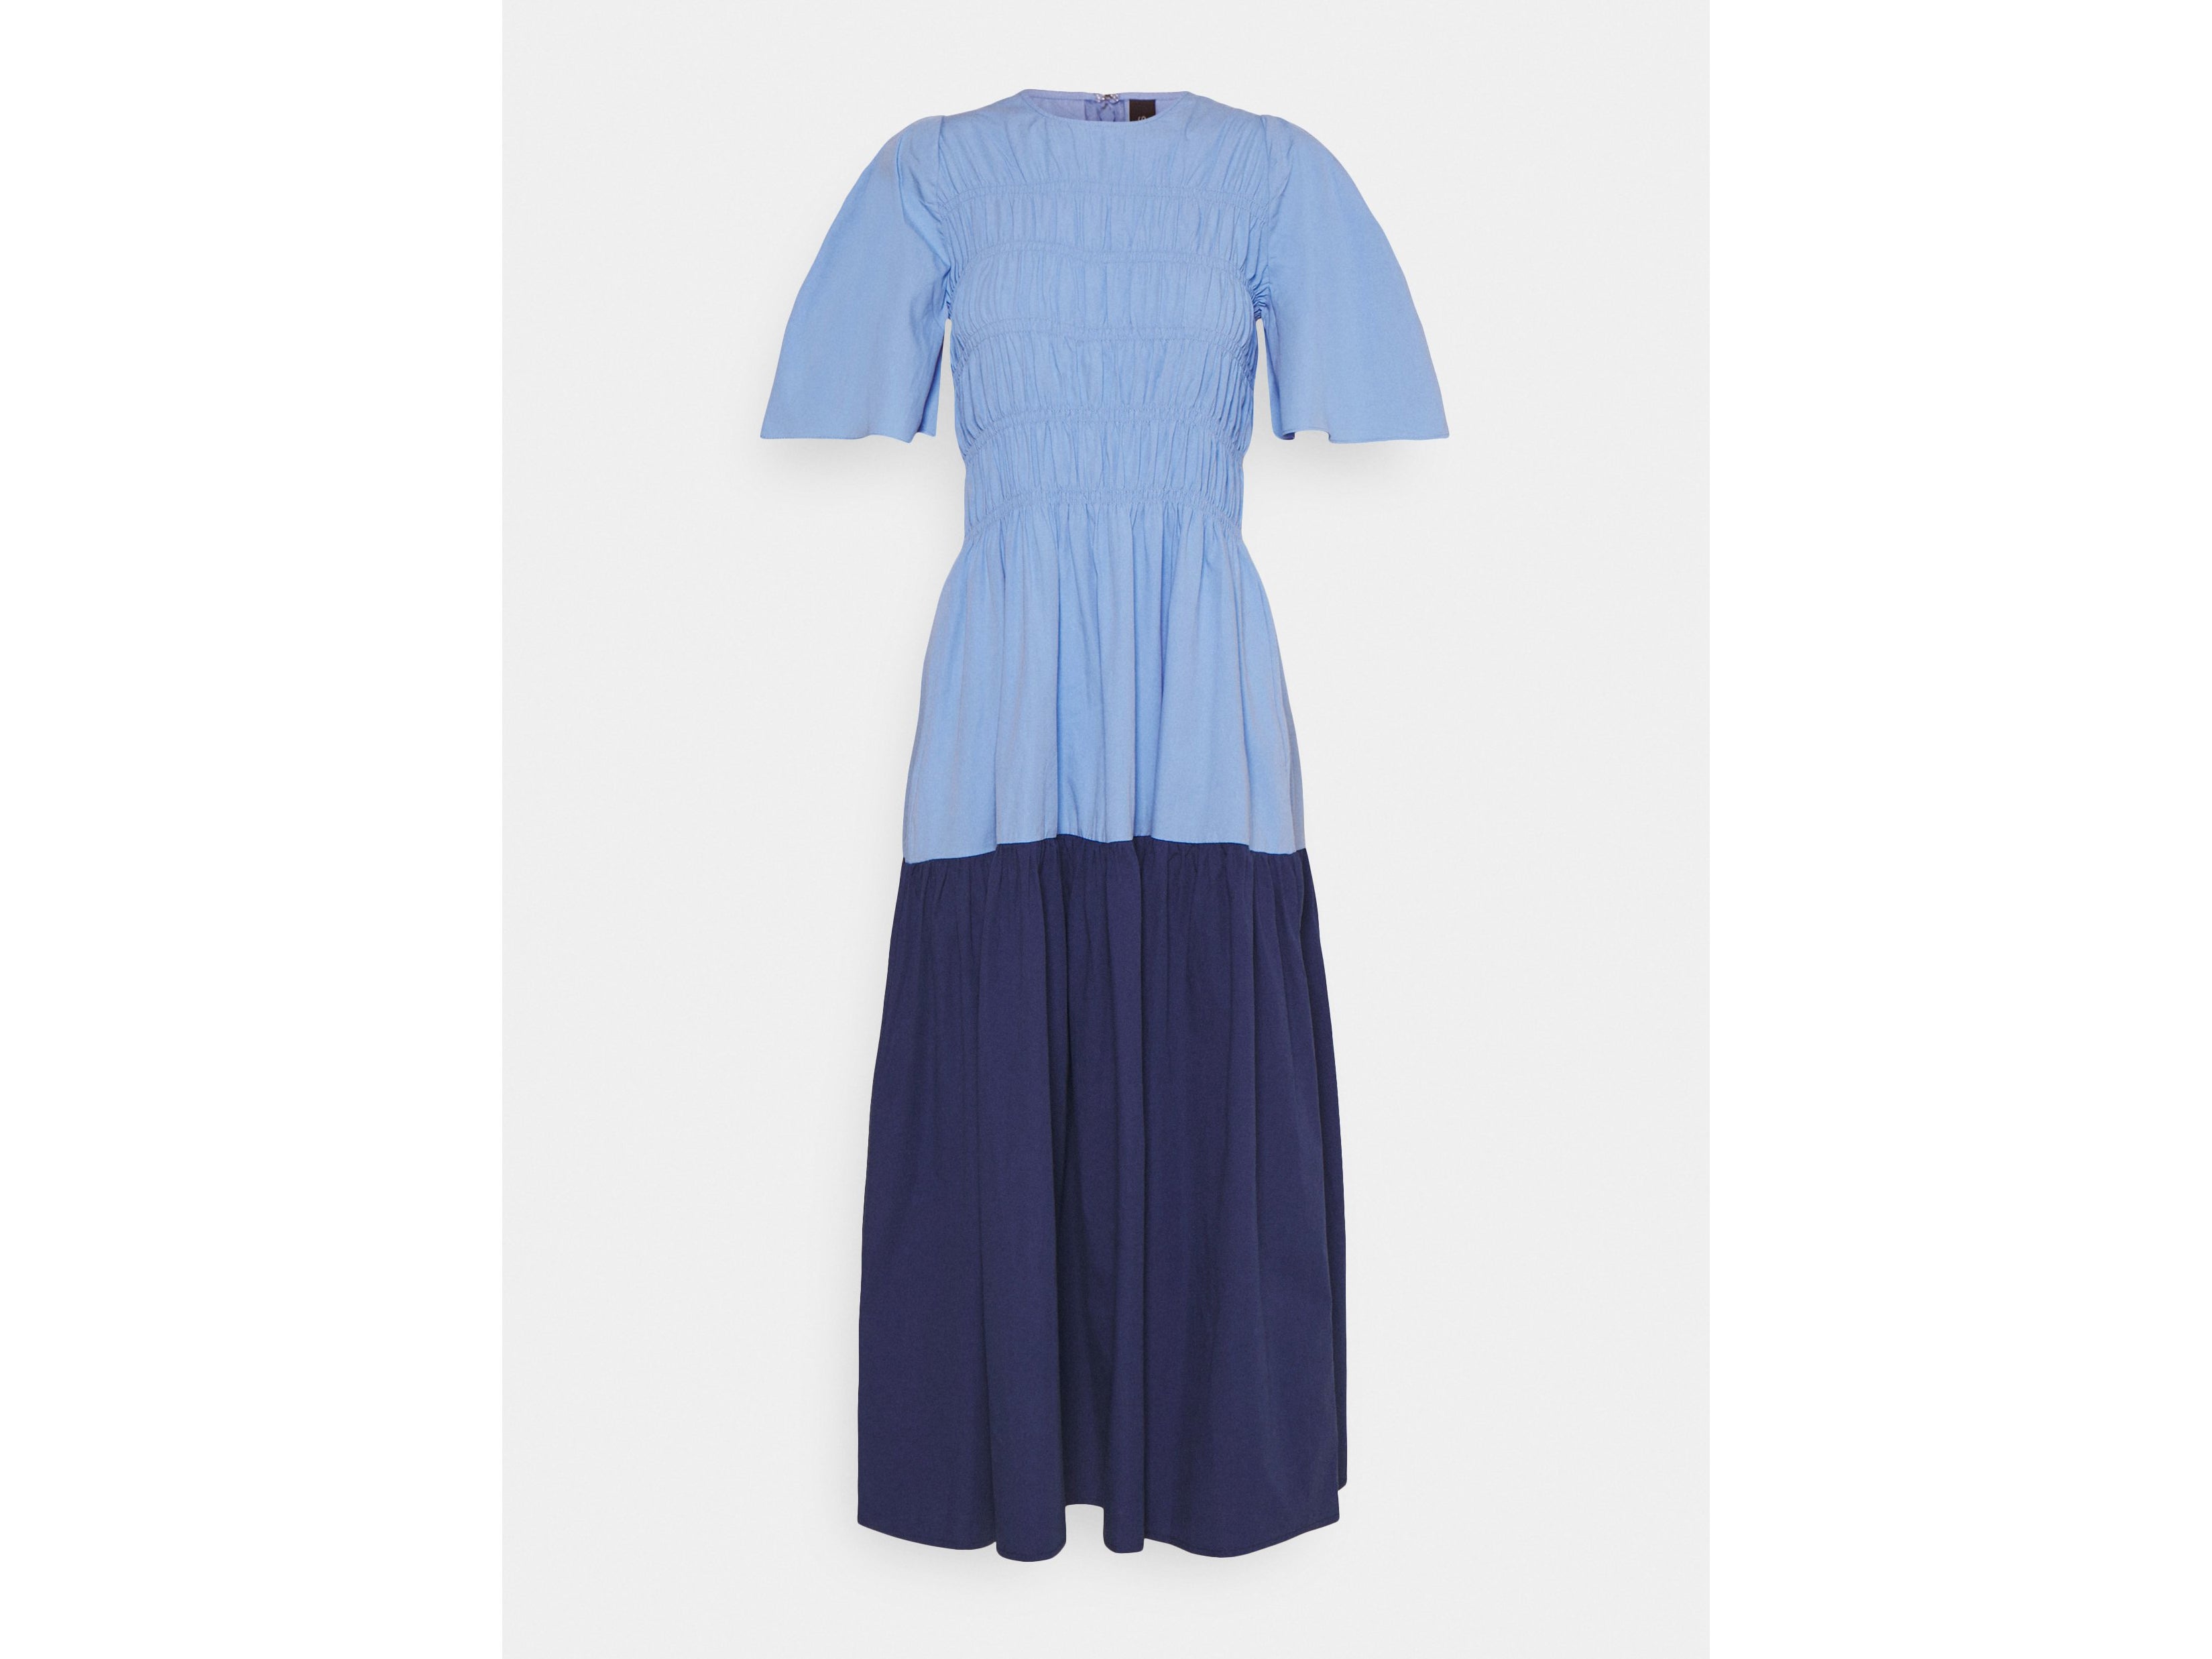 Best dresses with pockets that will take you from work to summer cocktails  | The Independent